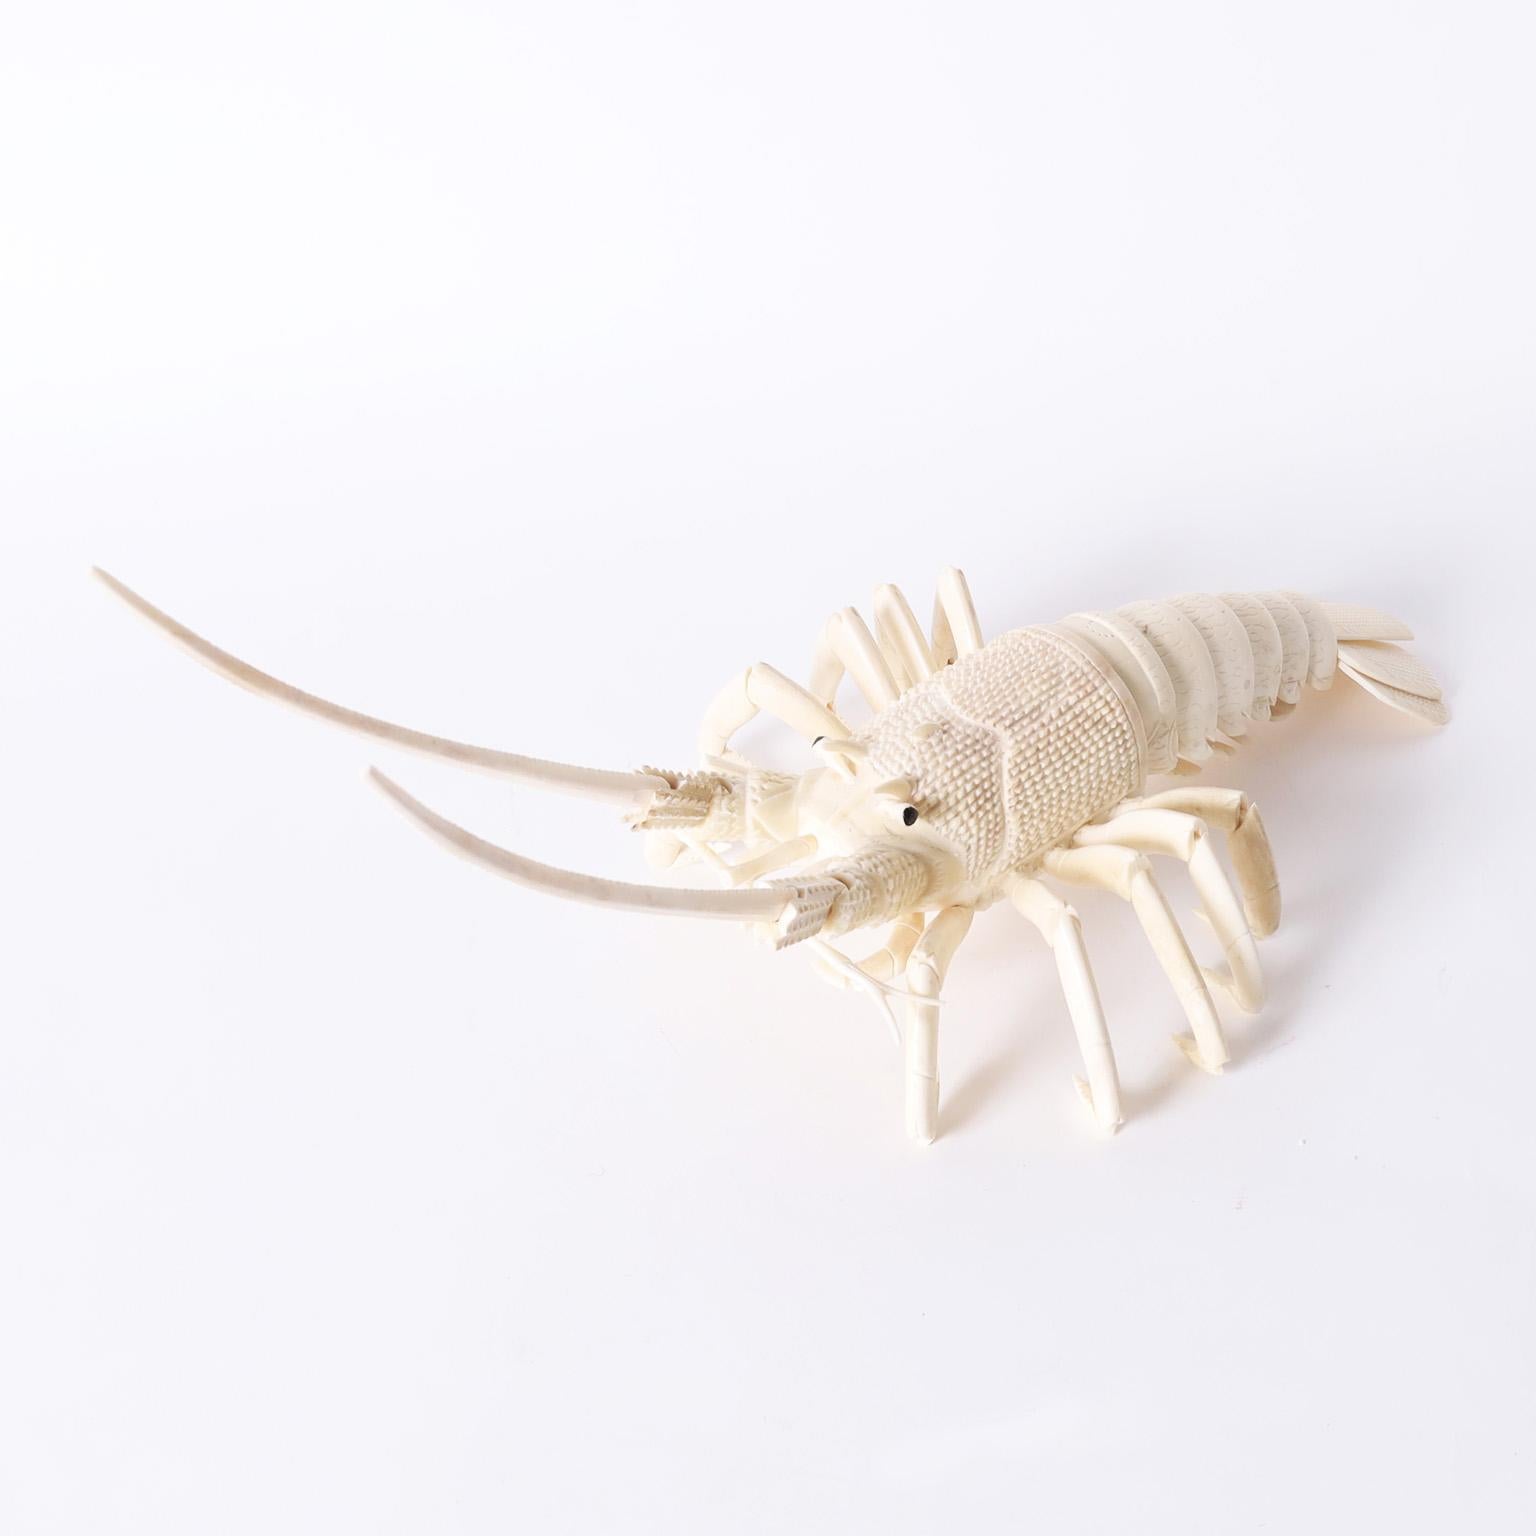 Lofty large articulated lobster sculpture or object of art crafted in carved bone with hinged antennae and flexible tail.